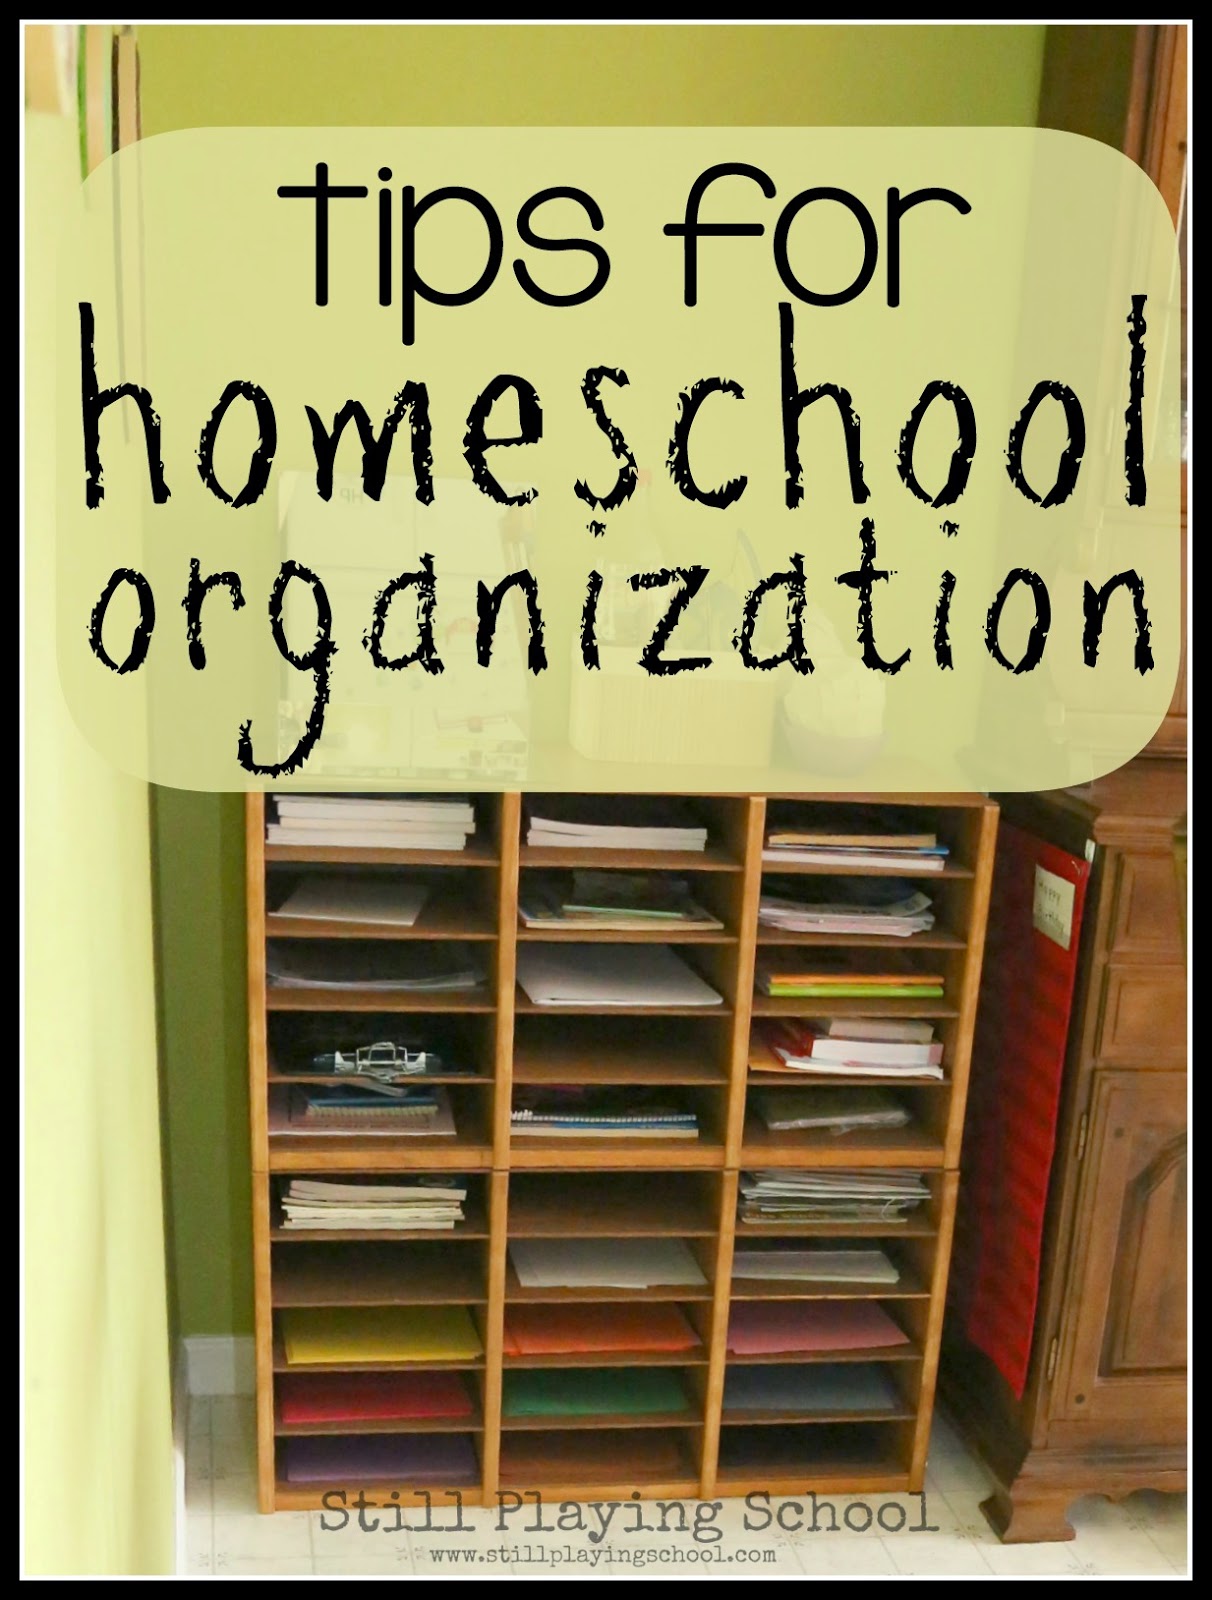 Our Homeschool Organization - By Healthier Spaces Organizing